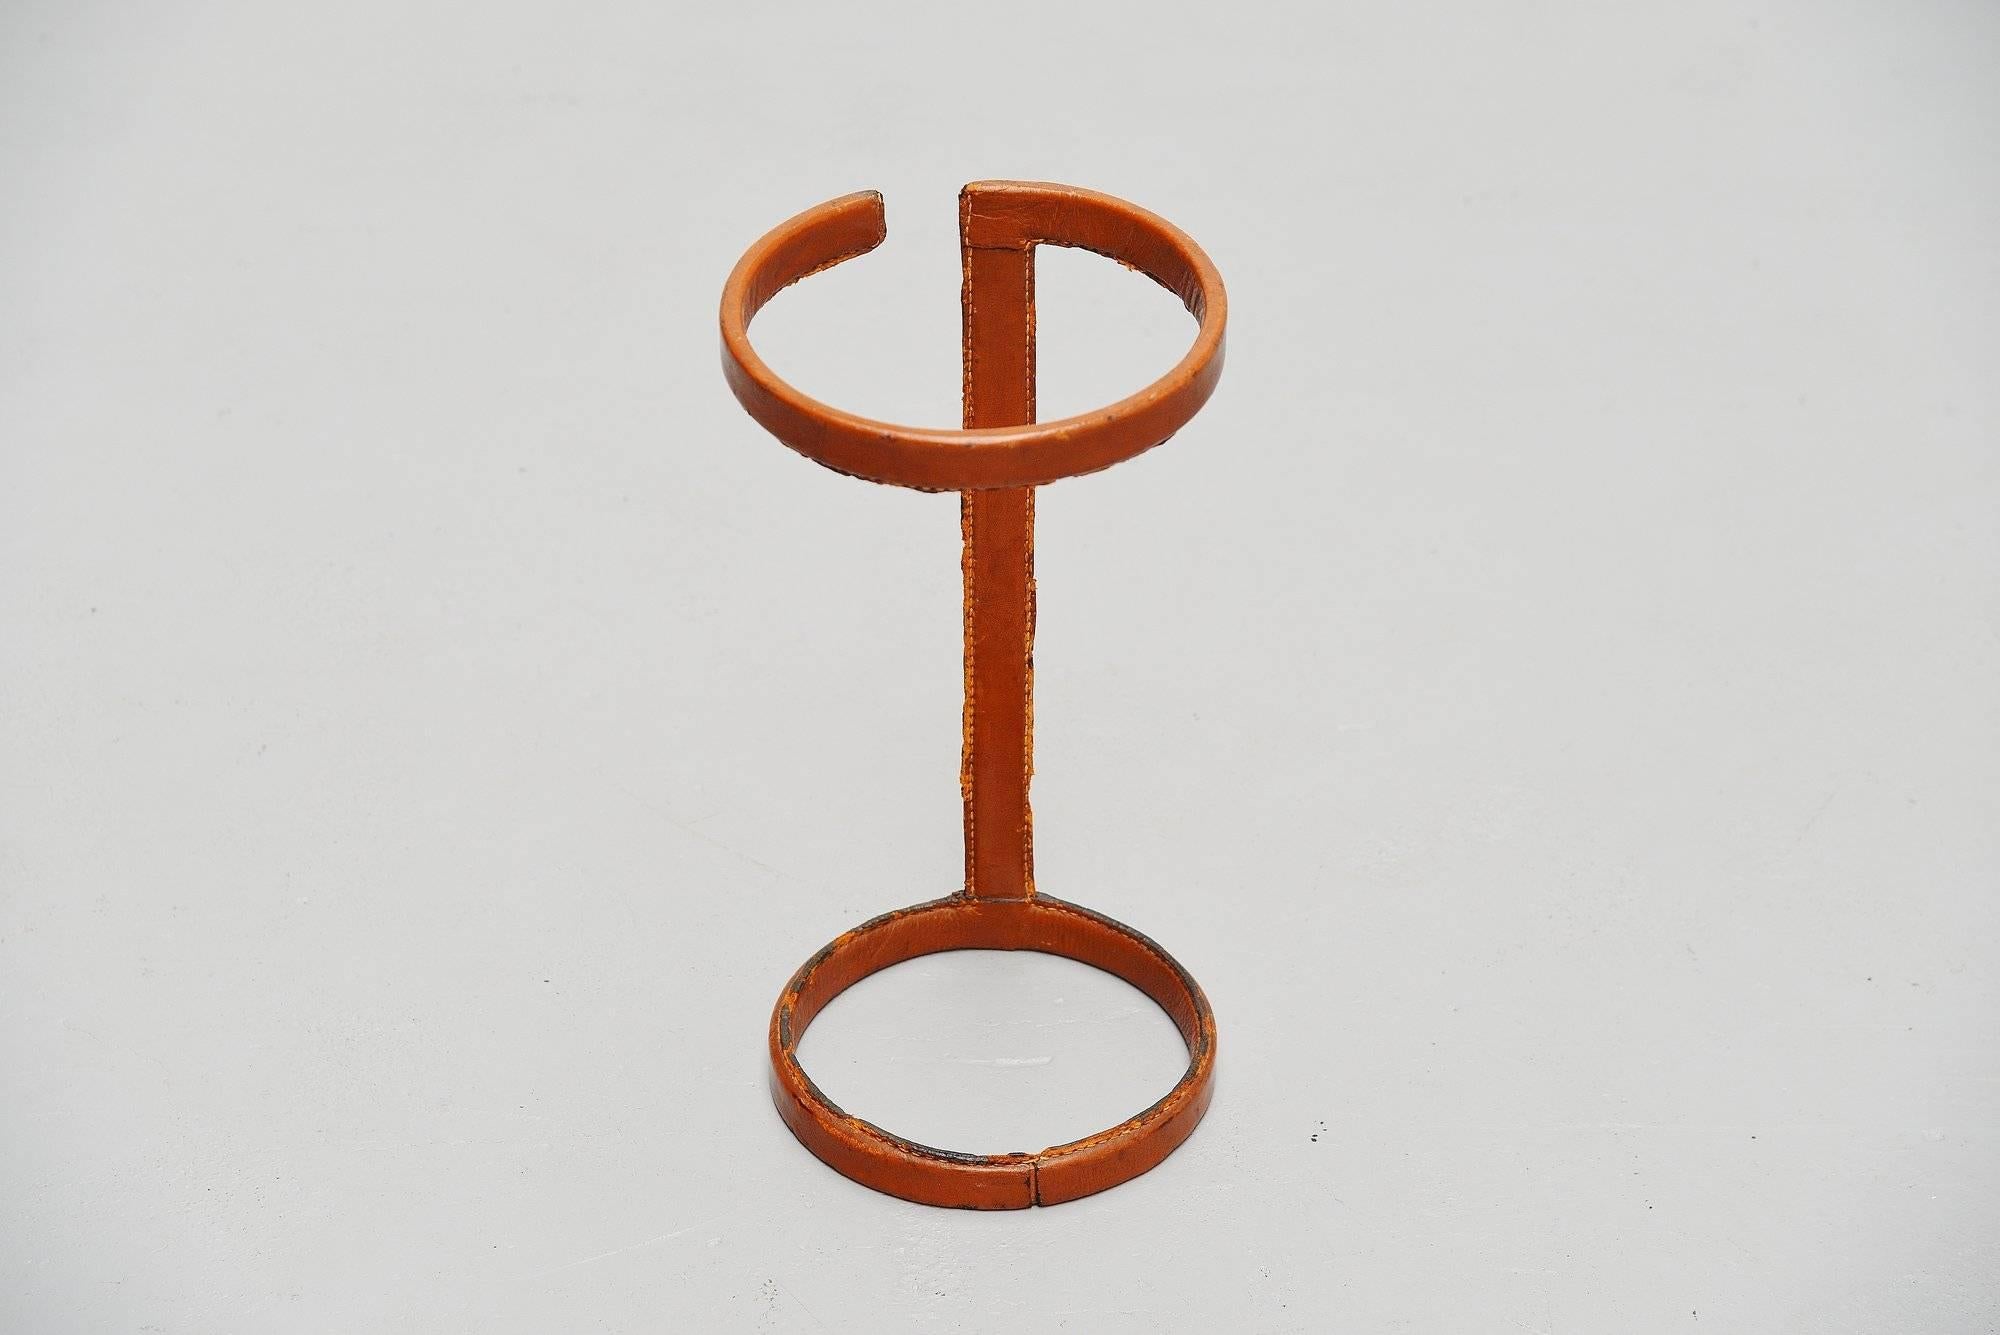 Decorative umbrella stand designed by Jacques Adnet and produced in the Atelier of Jacques Adnet, France, 1960. This umbrella stand has a cognac stitched leather frame with metal inside. It has some losses and a strong patina but it suits a piece